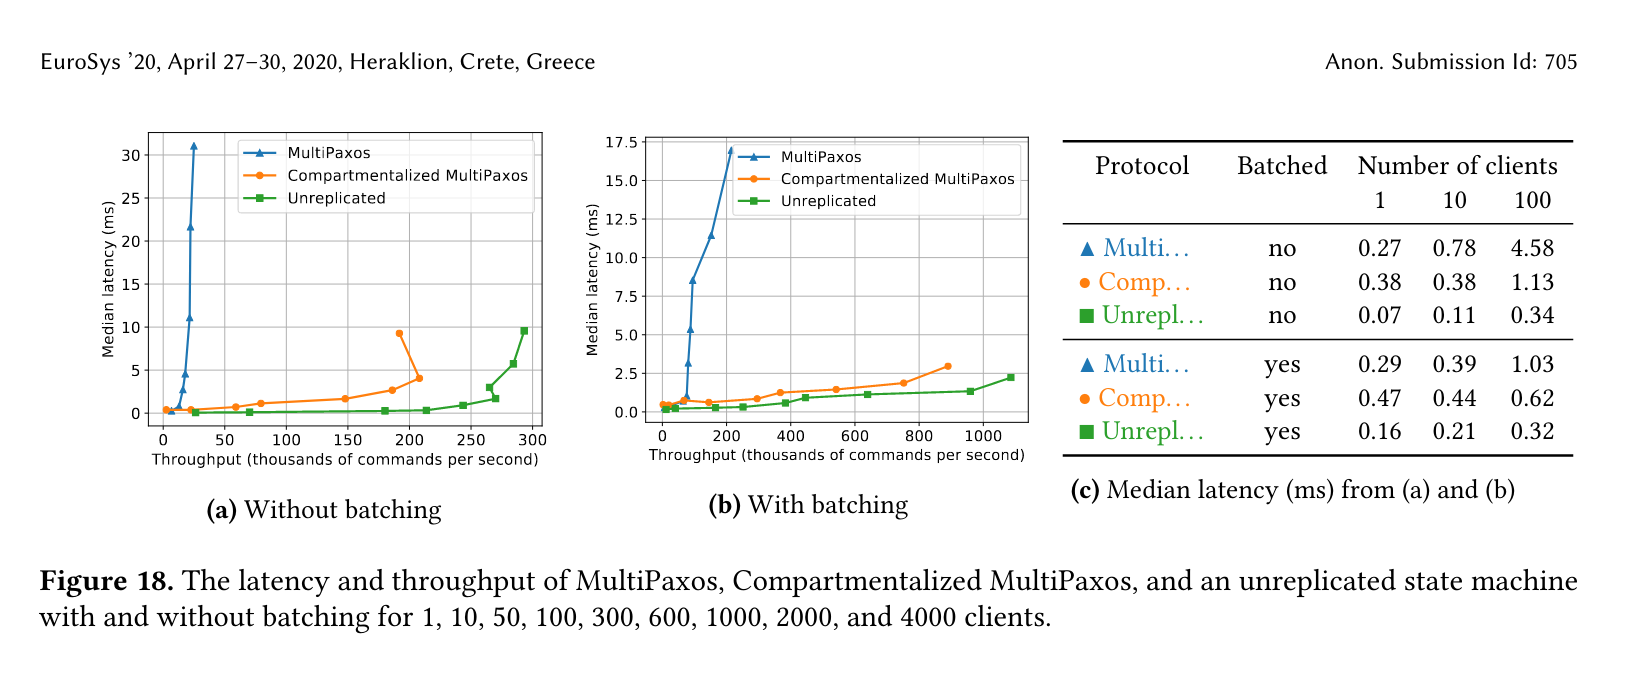 Compartmentalized Paxos performance comparison to Multipaxos and an unreplicated state machine